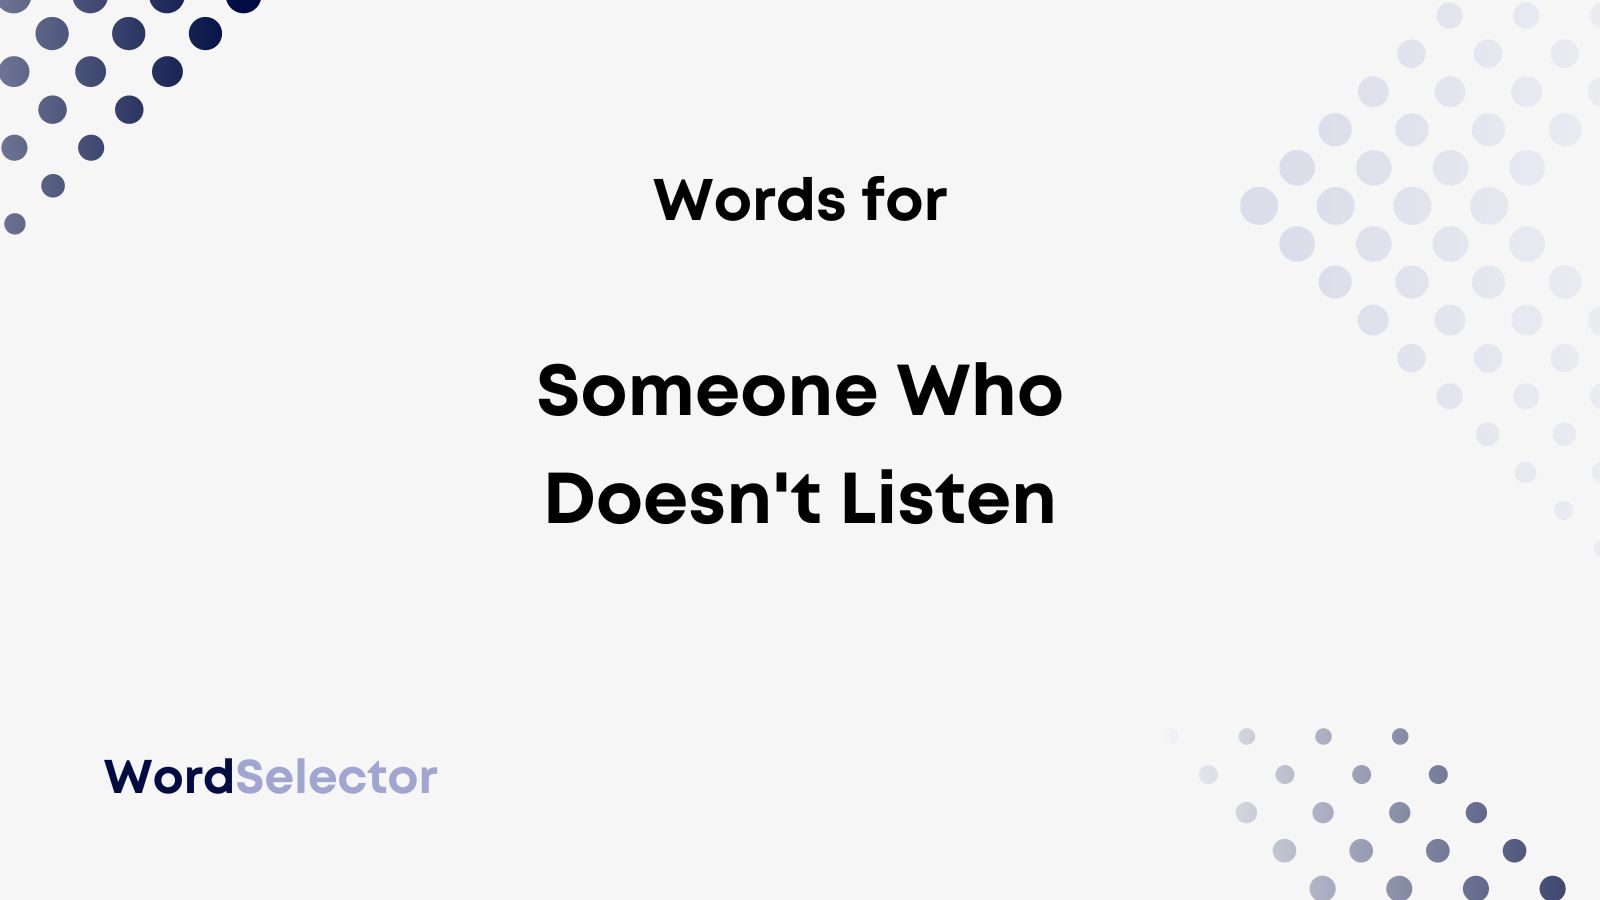 11 Words For Someone Who Doesn'T Listen - Wordselector